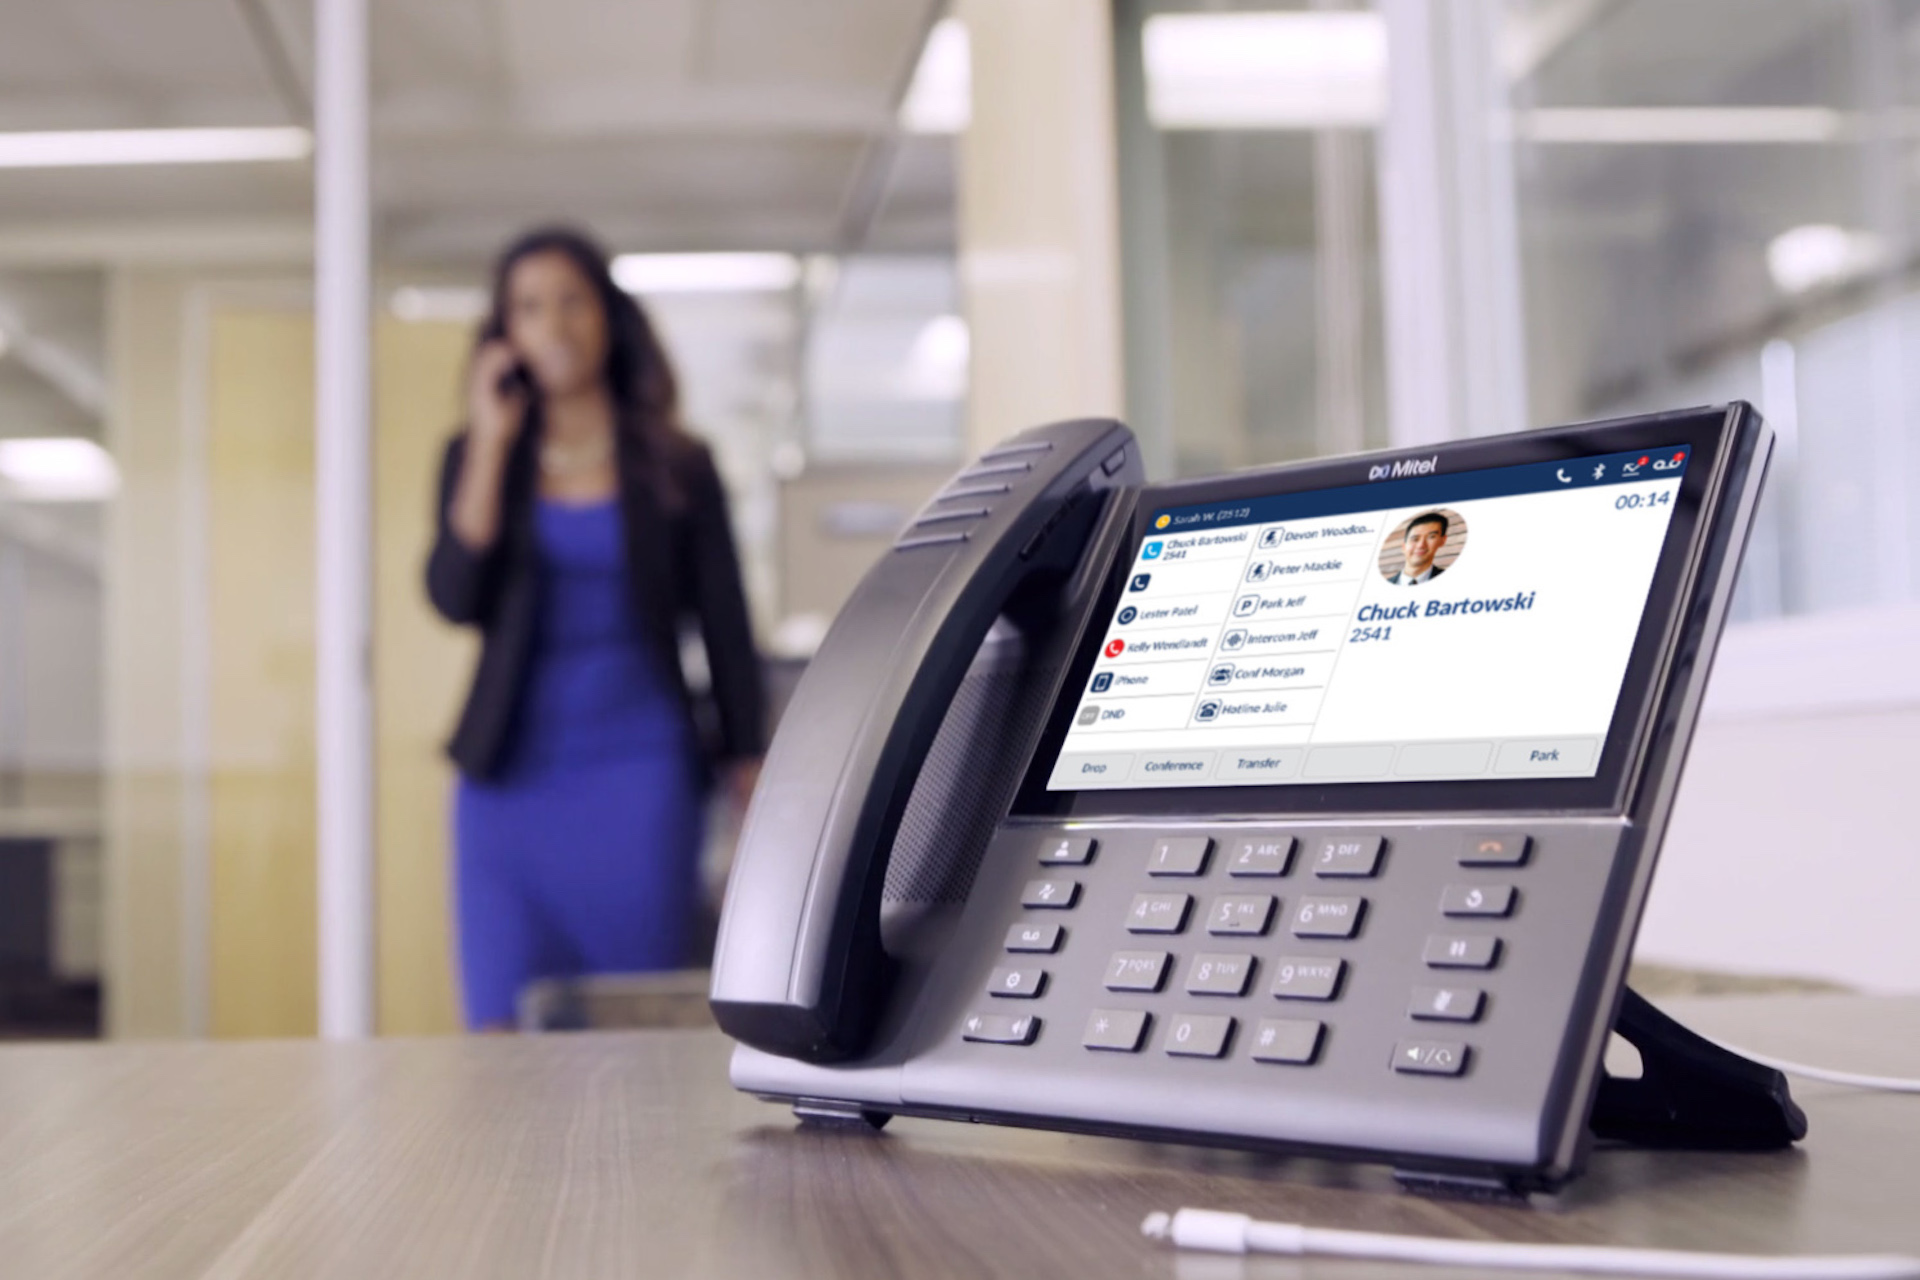 Best Handsets For Mitel Phone Systems